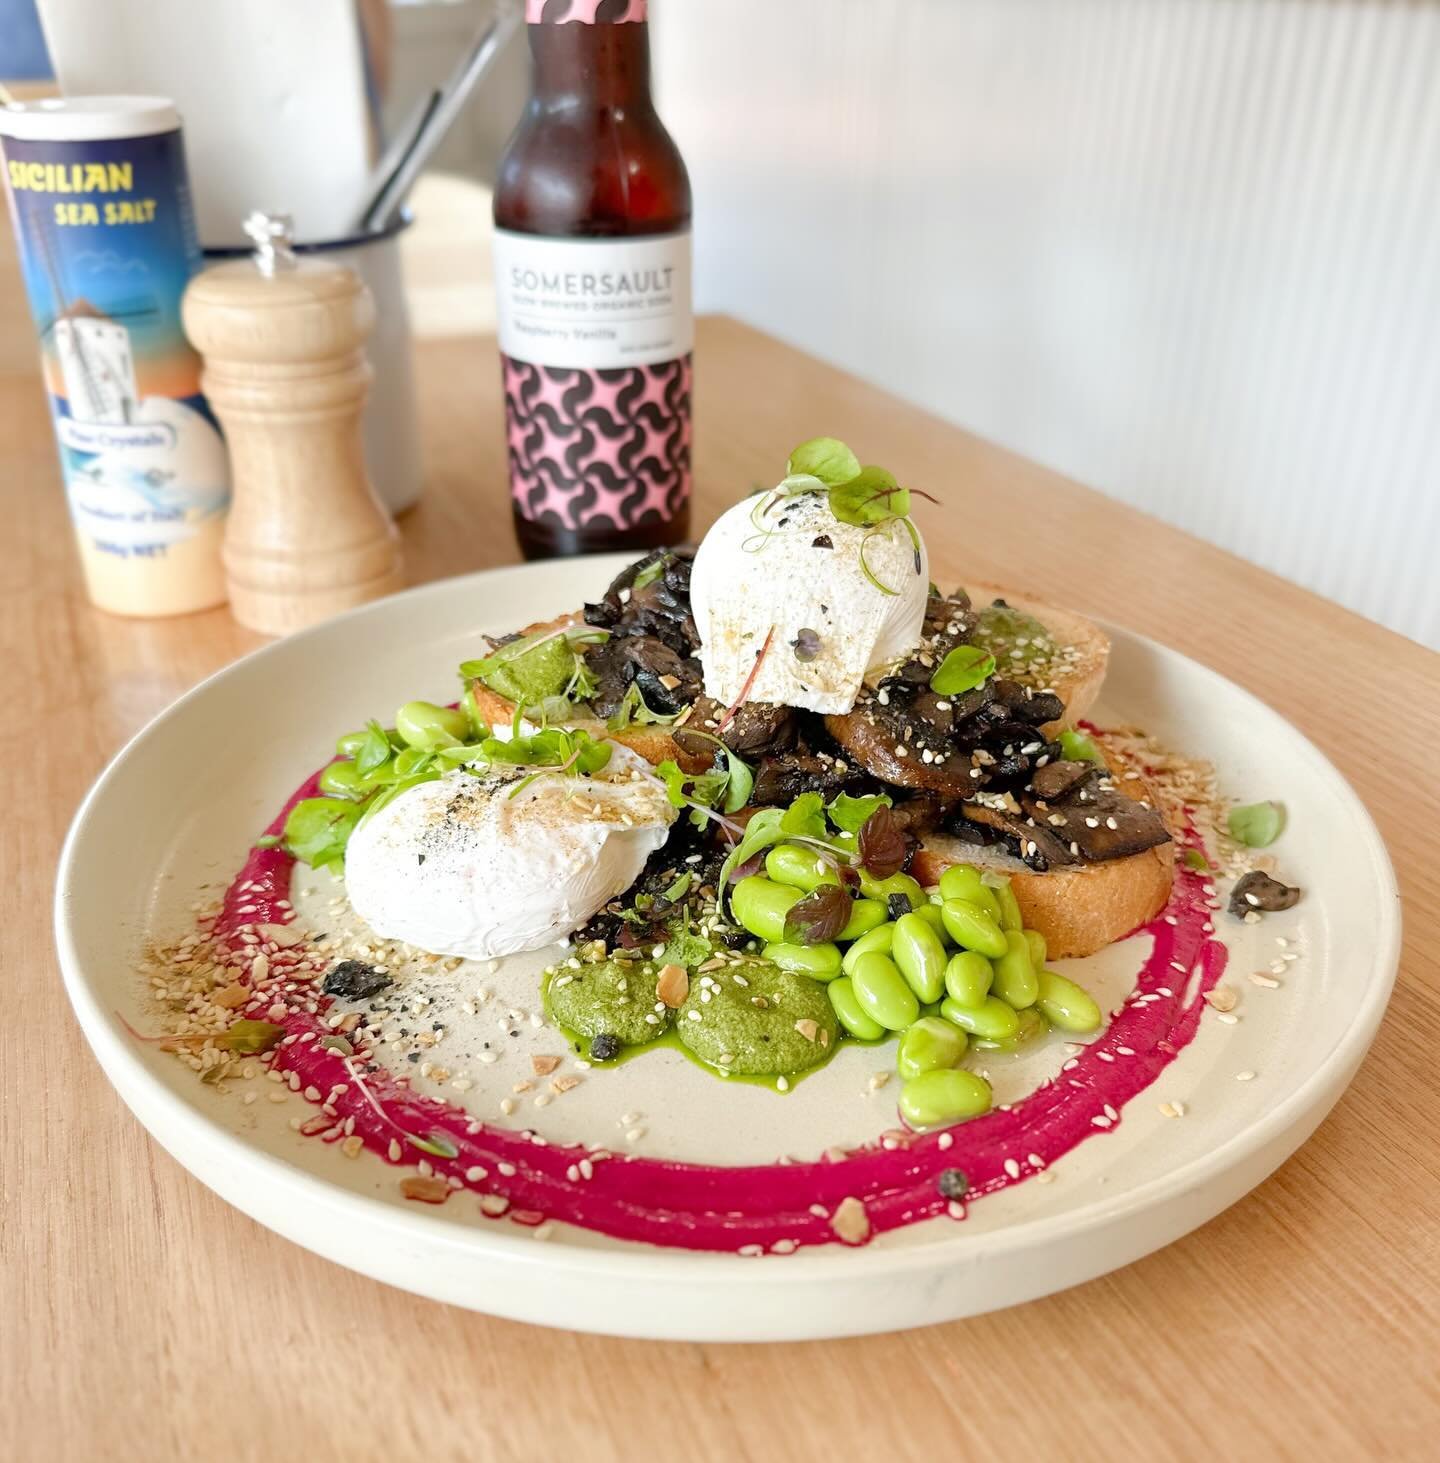 Treat mum (or yourself!) to our special &lsquo;Mushroom Fields&rsquo; 🍄 Garlic &amp; thyme mushrooms served on sourdough with poached eggs, edamame, pesto, dukkah and beetroot goats curd 🌸